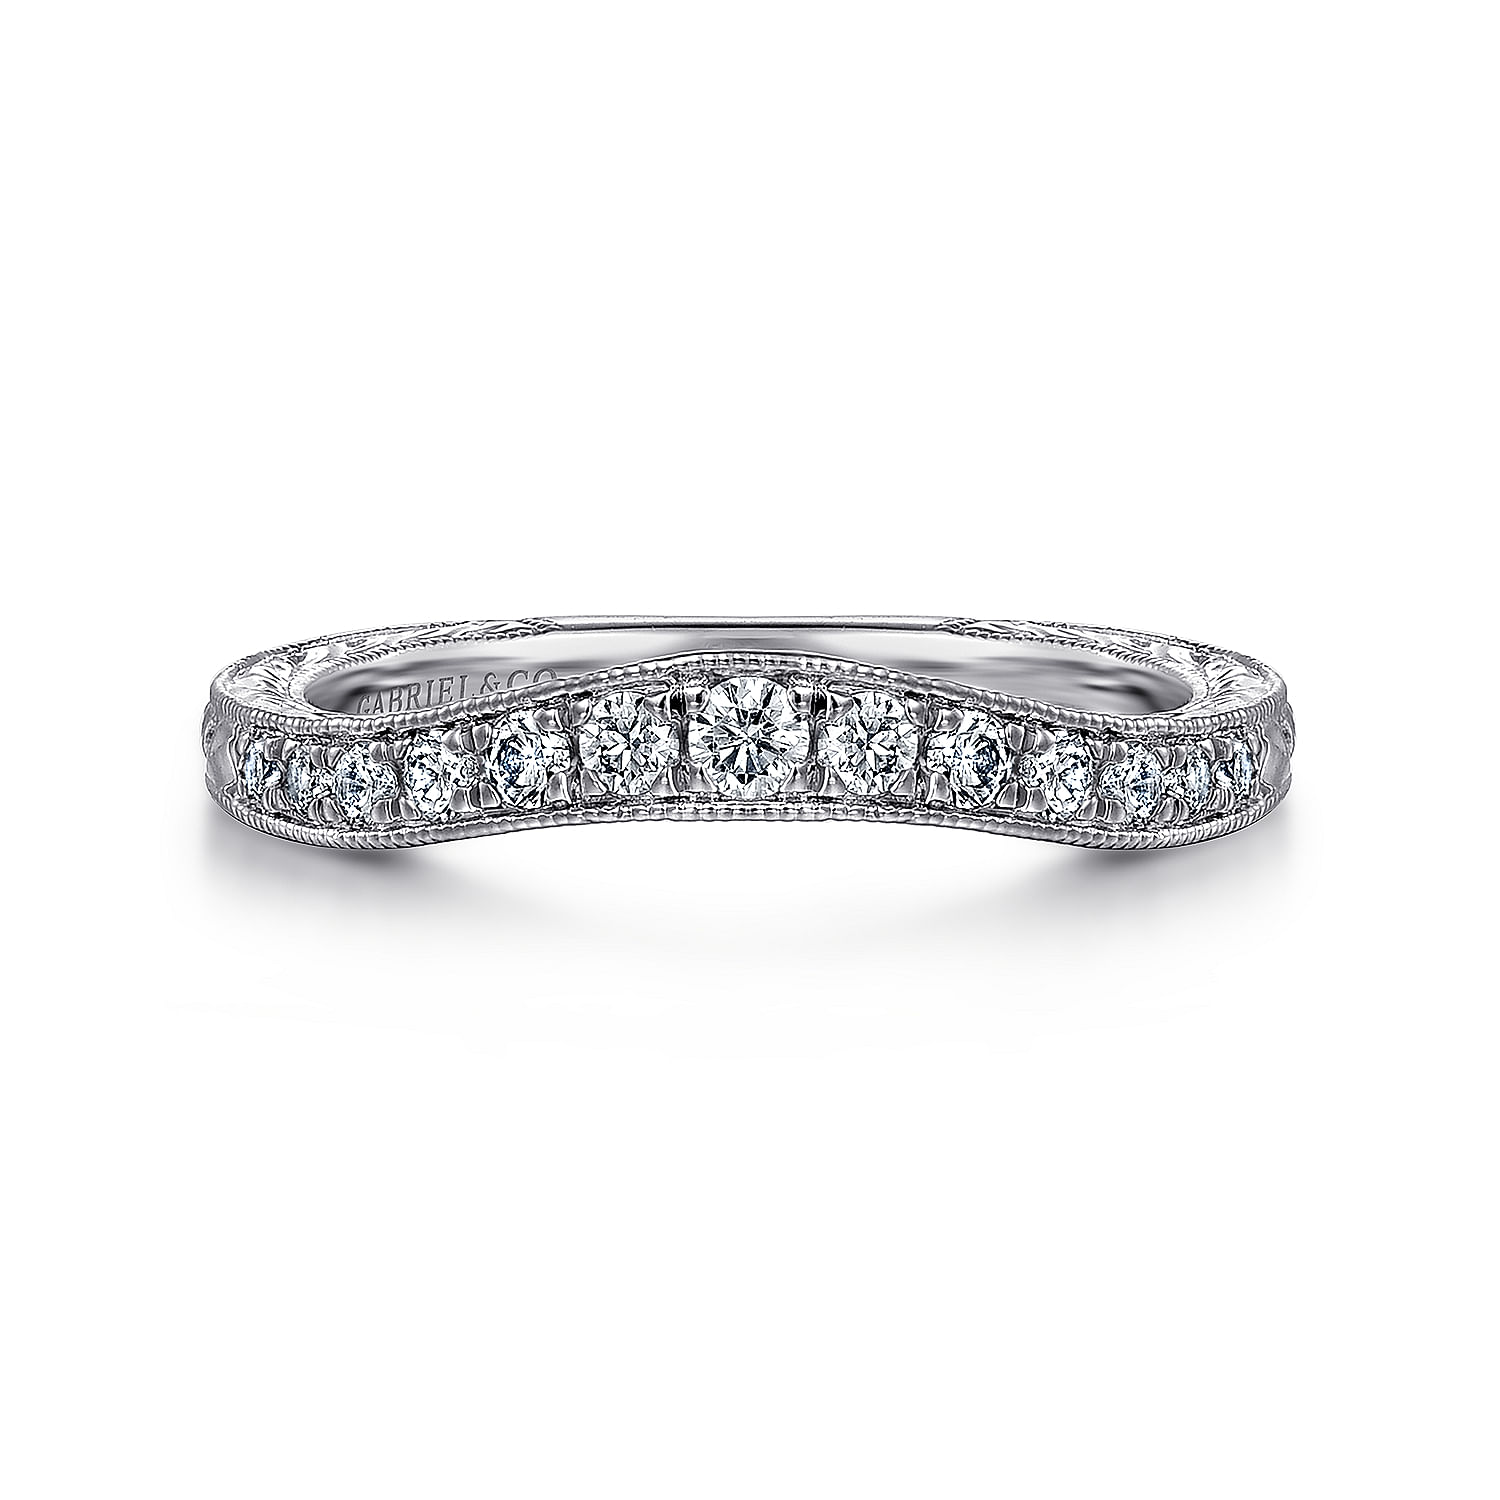 Provence - Vintage Inspired  Curved 14K White Gold Micro Pave Diamond Wedding Band with Engraving